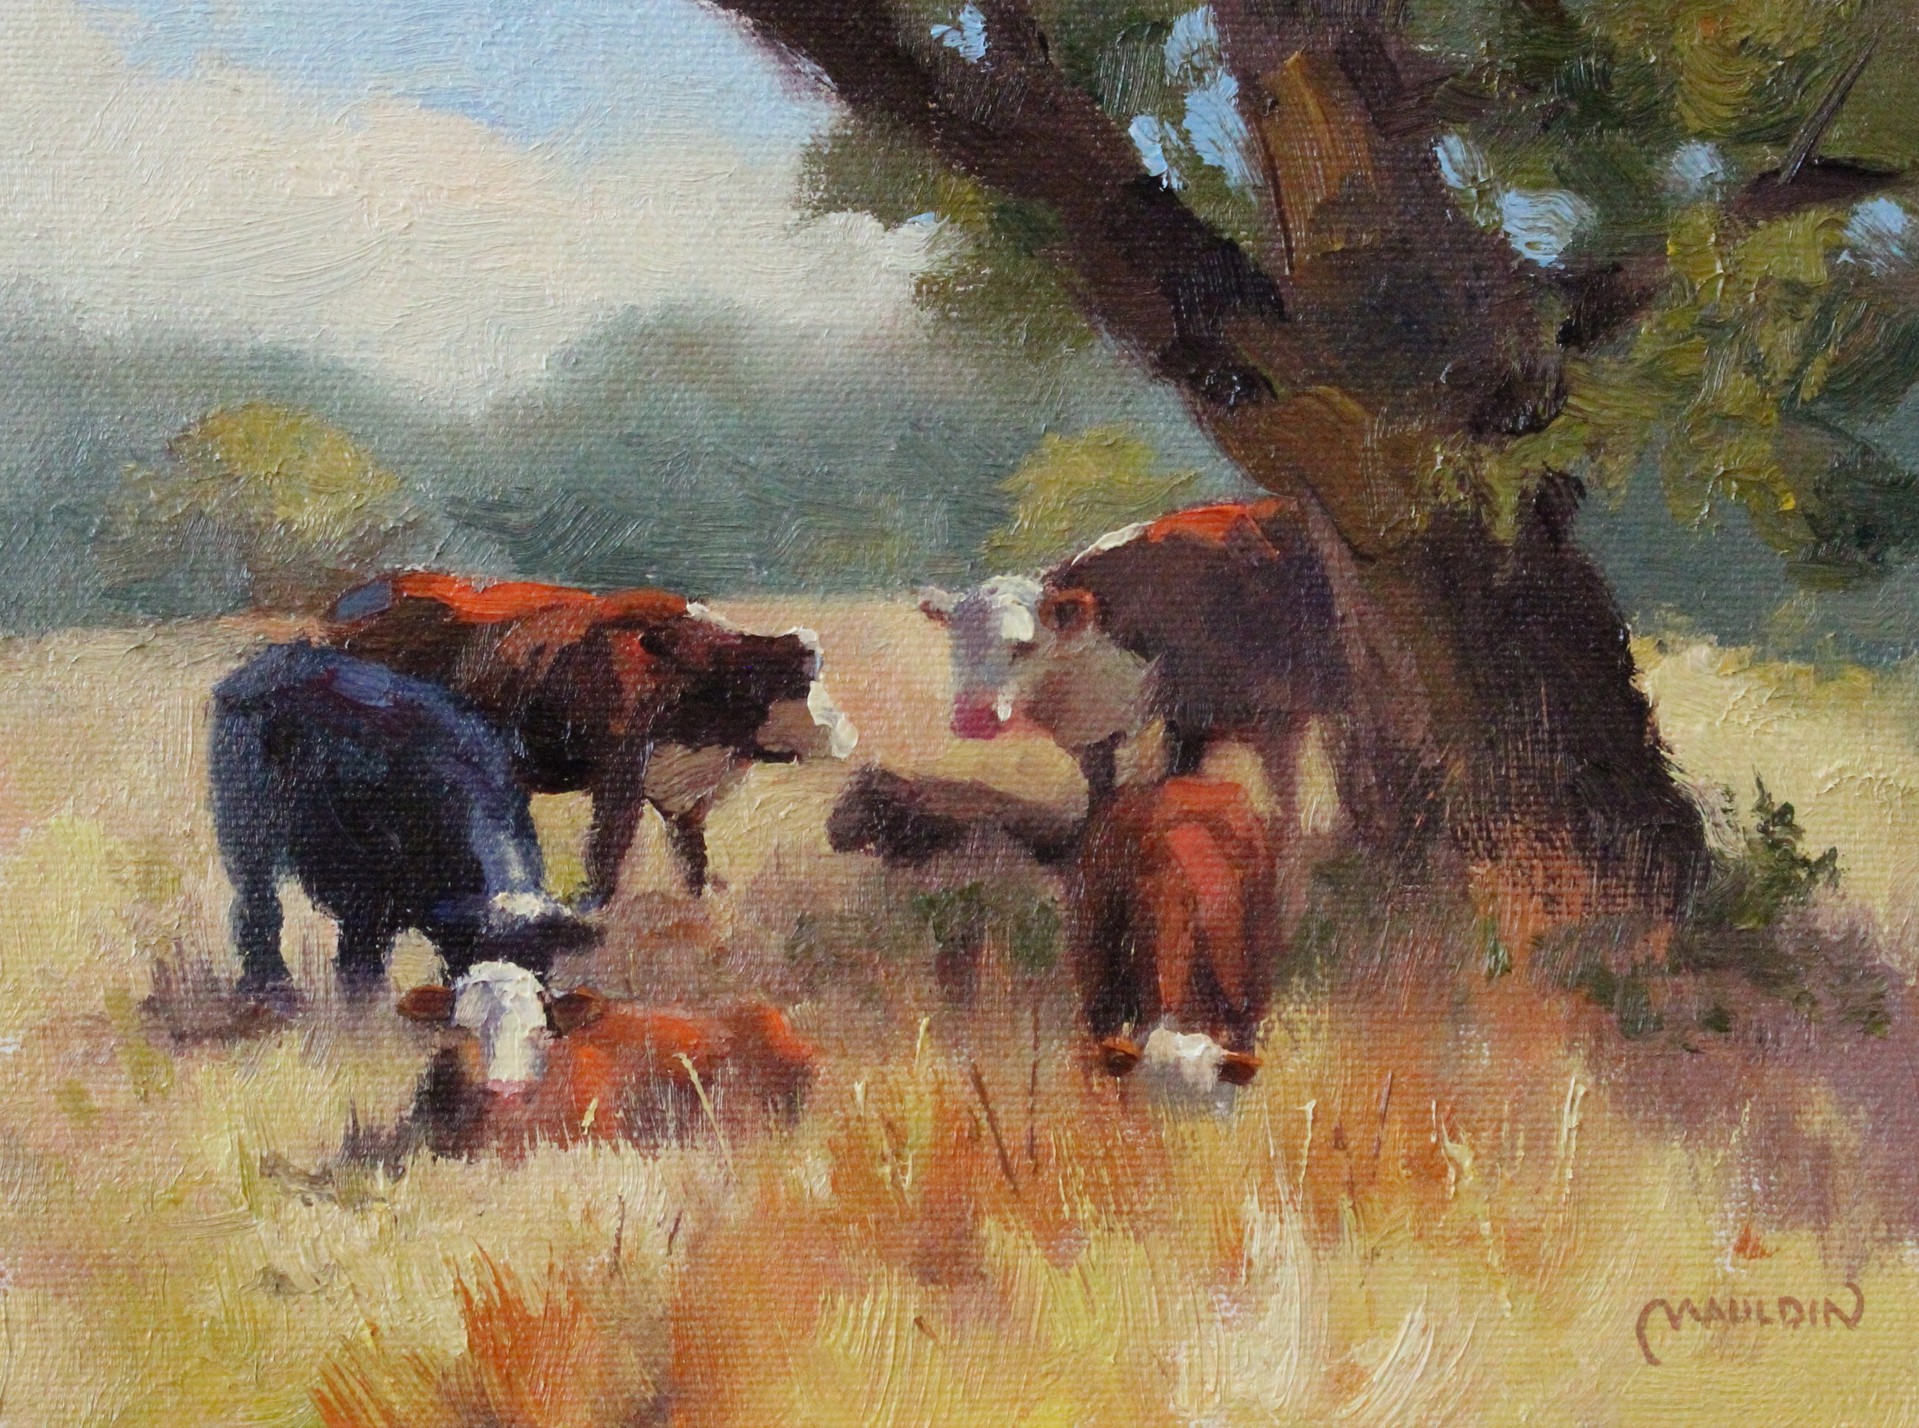 Pasture Party by Chuck Mauldin